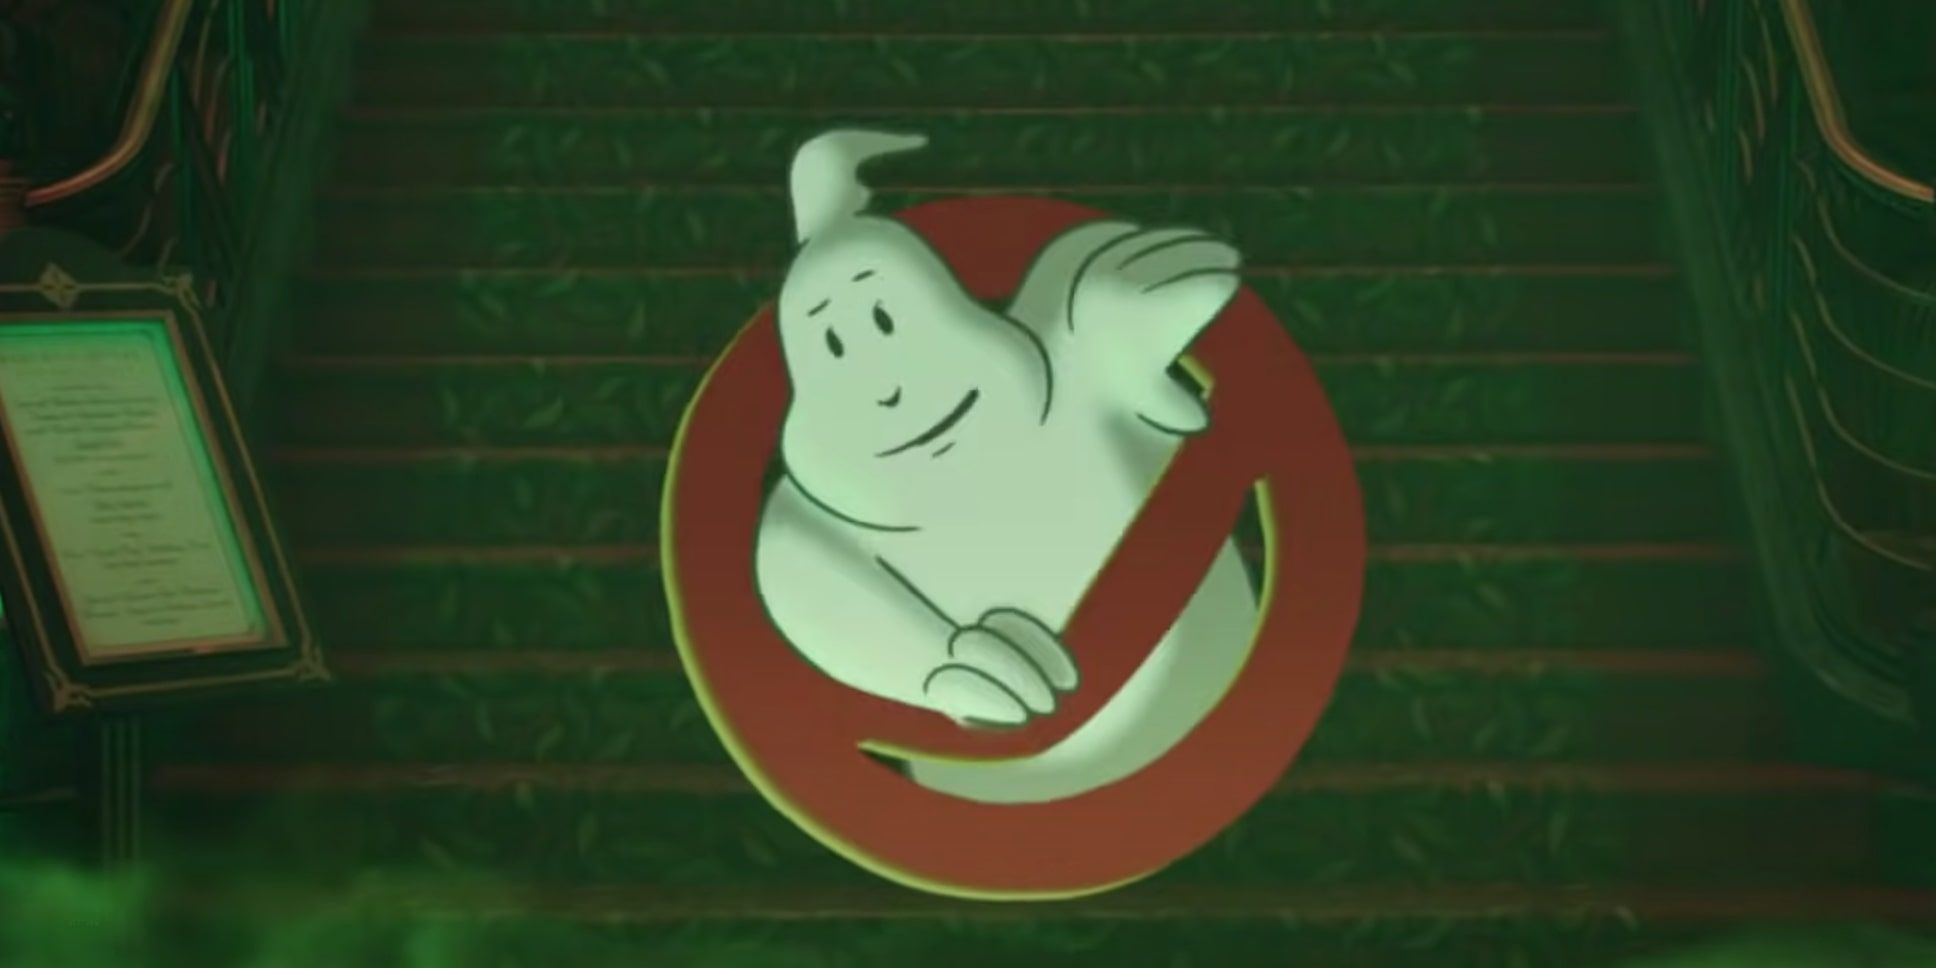 The ghost from the Ghostbusters' 'No-Ghost' logo breaks free